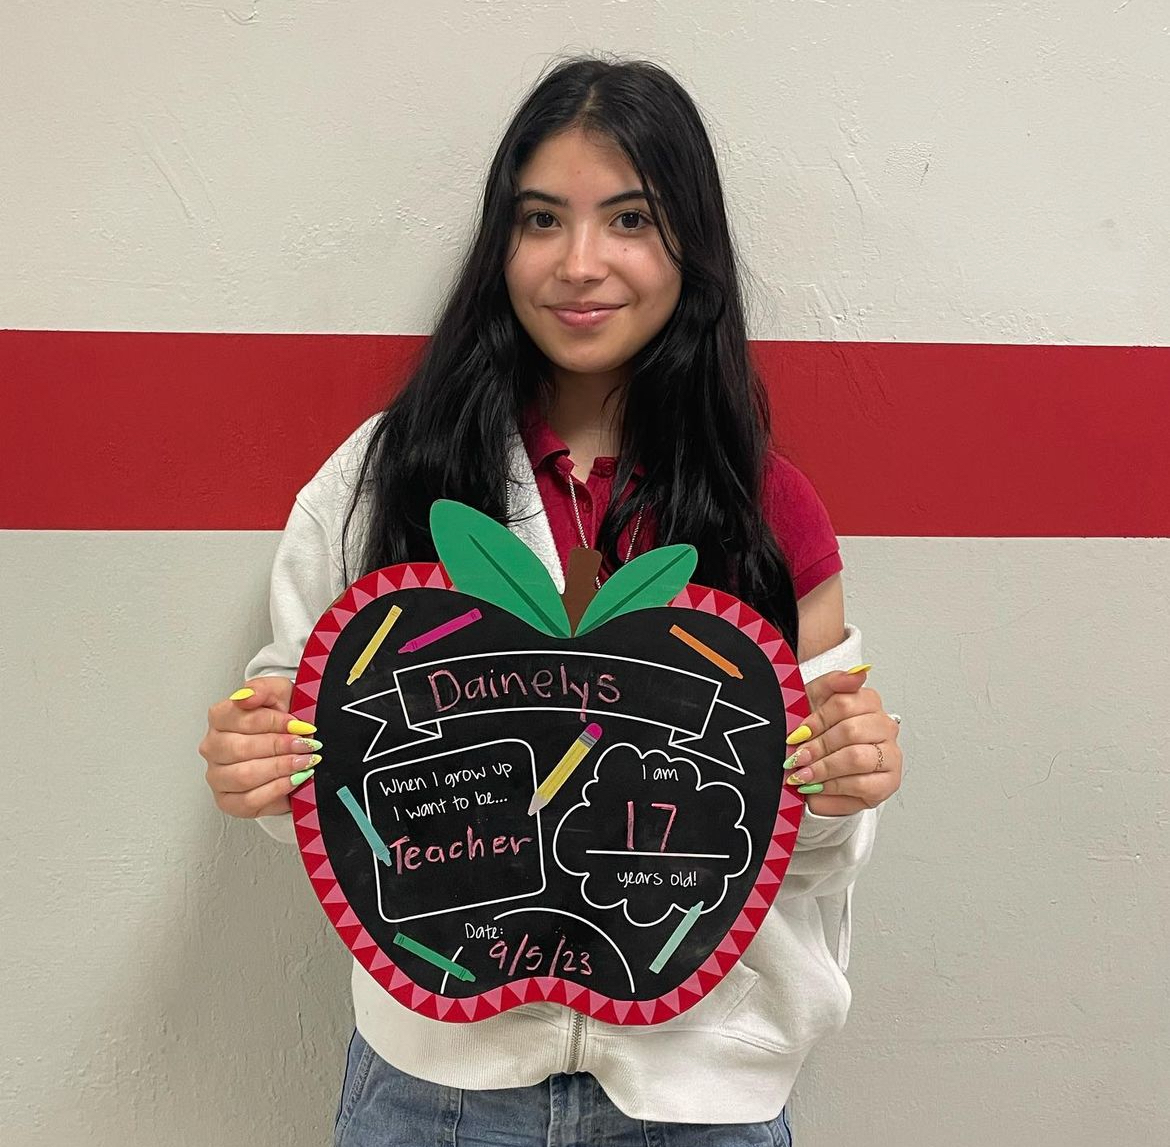 Senior Ledesma apires to become a teacher and inspire others.